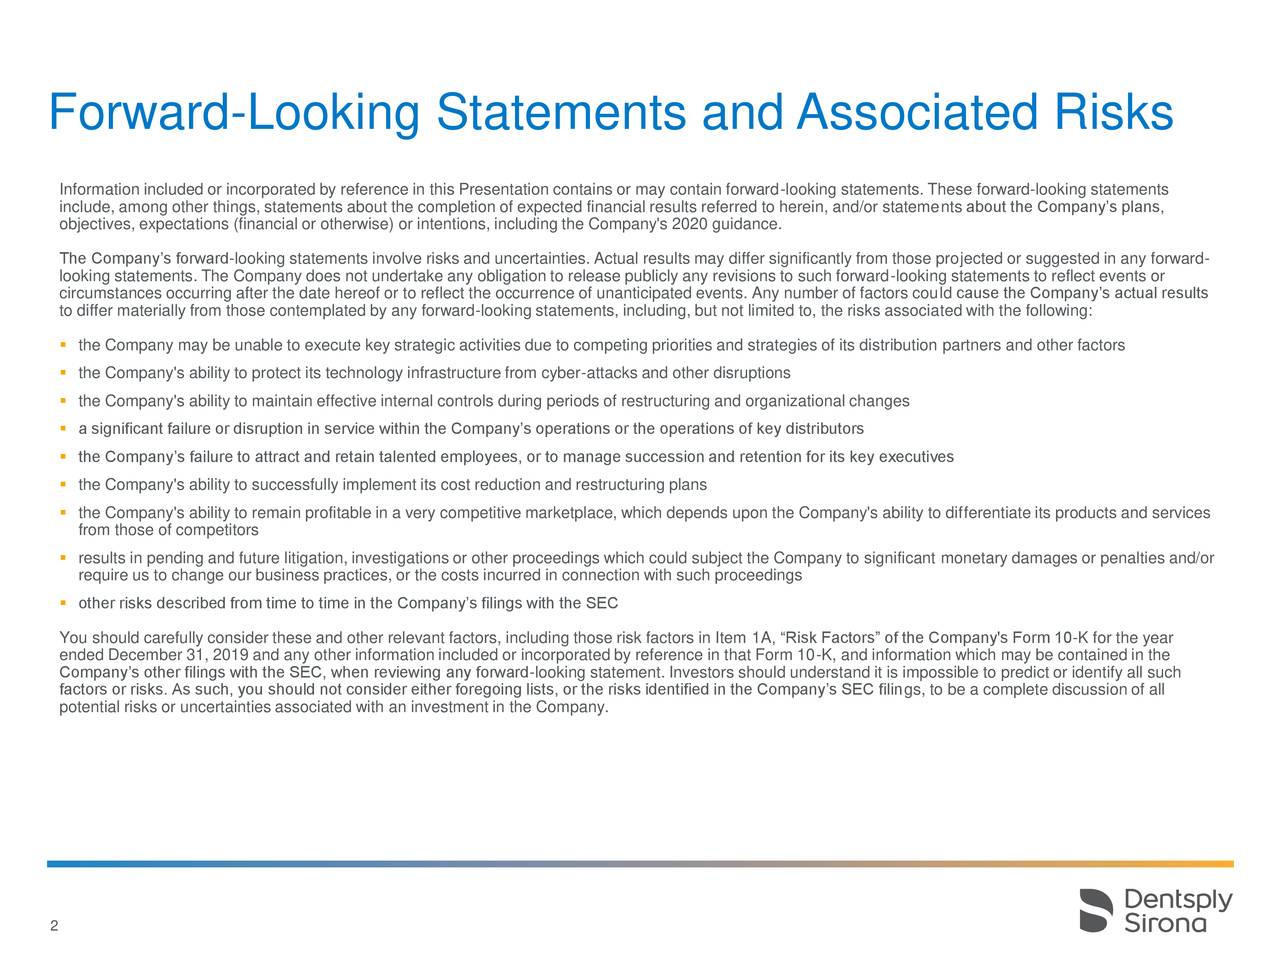 Forward-Looking Statements and Associated Risks